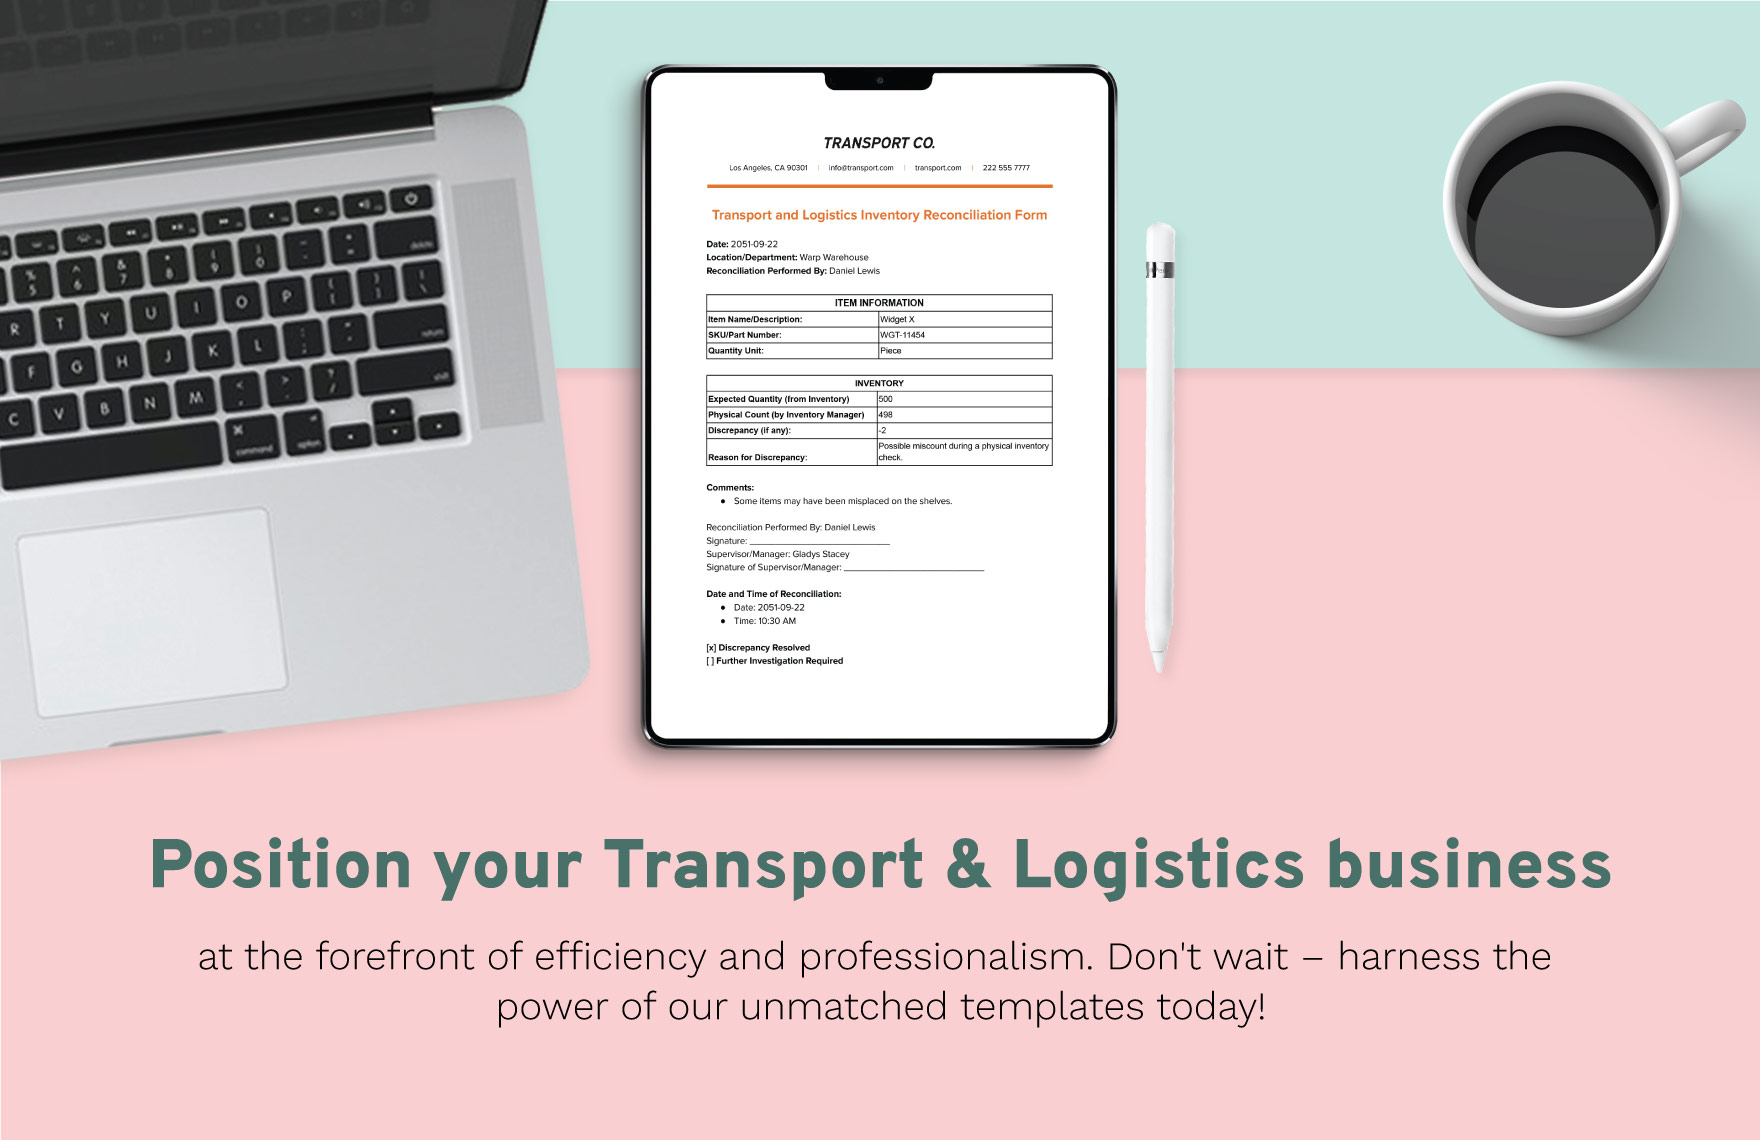 Transport and Logistics Inventory Reconciliation Form Template